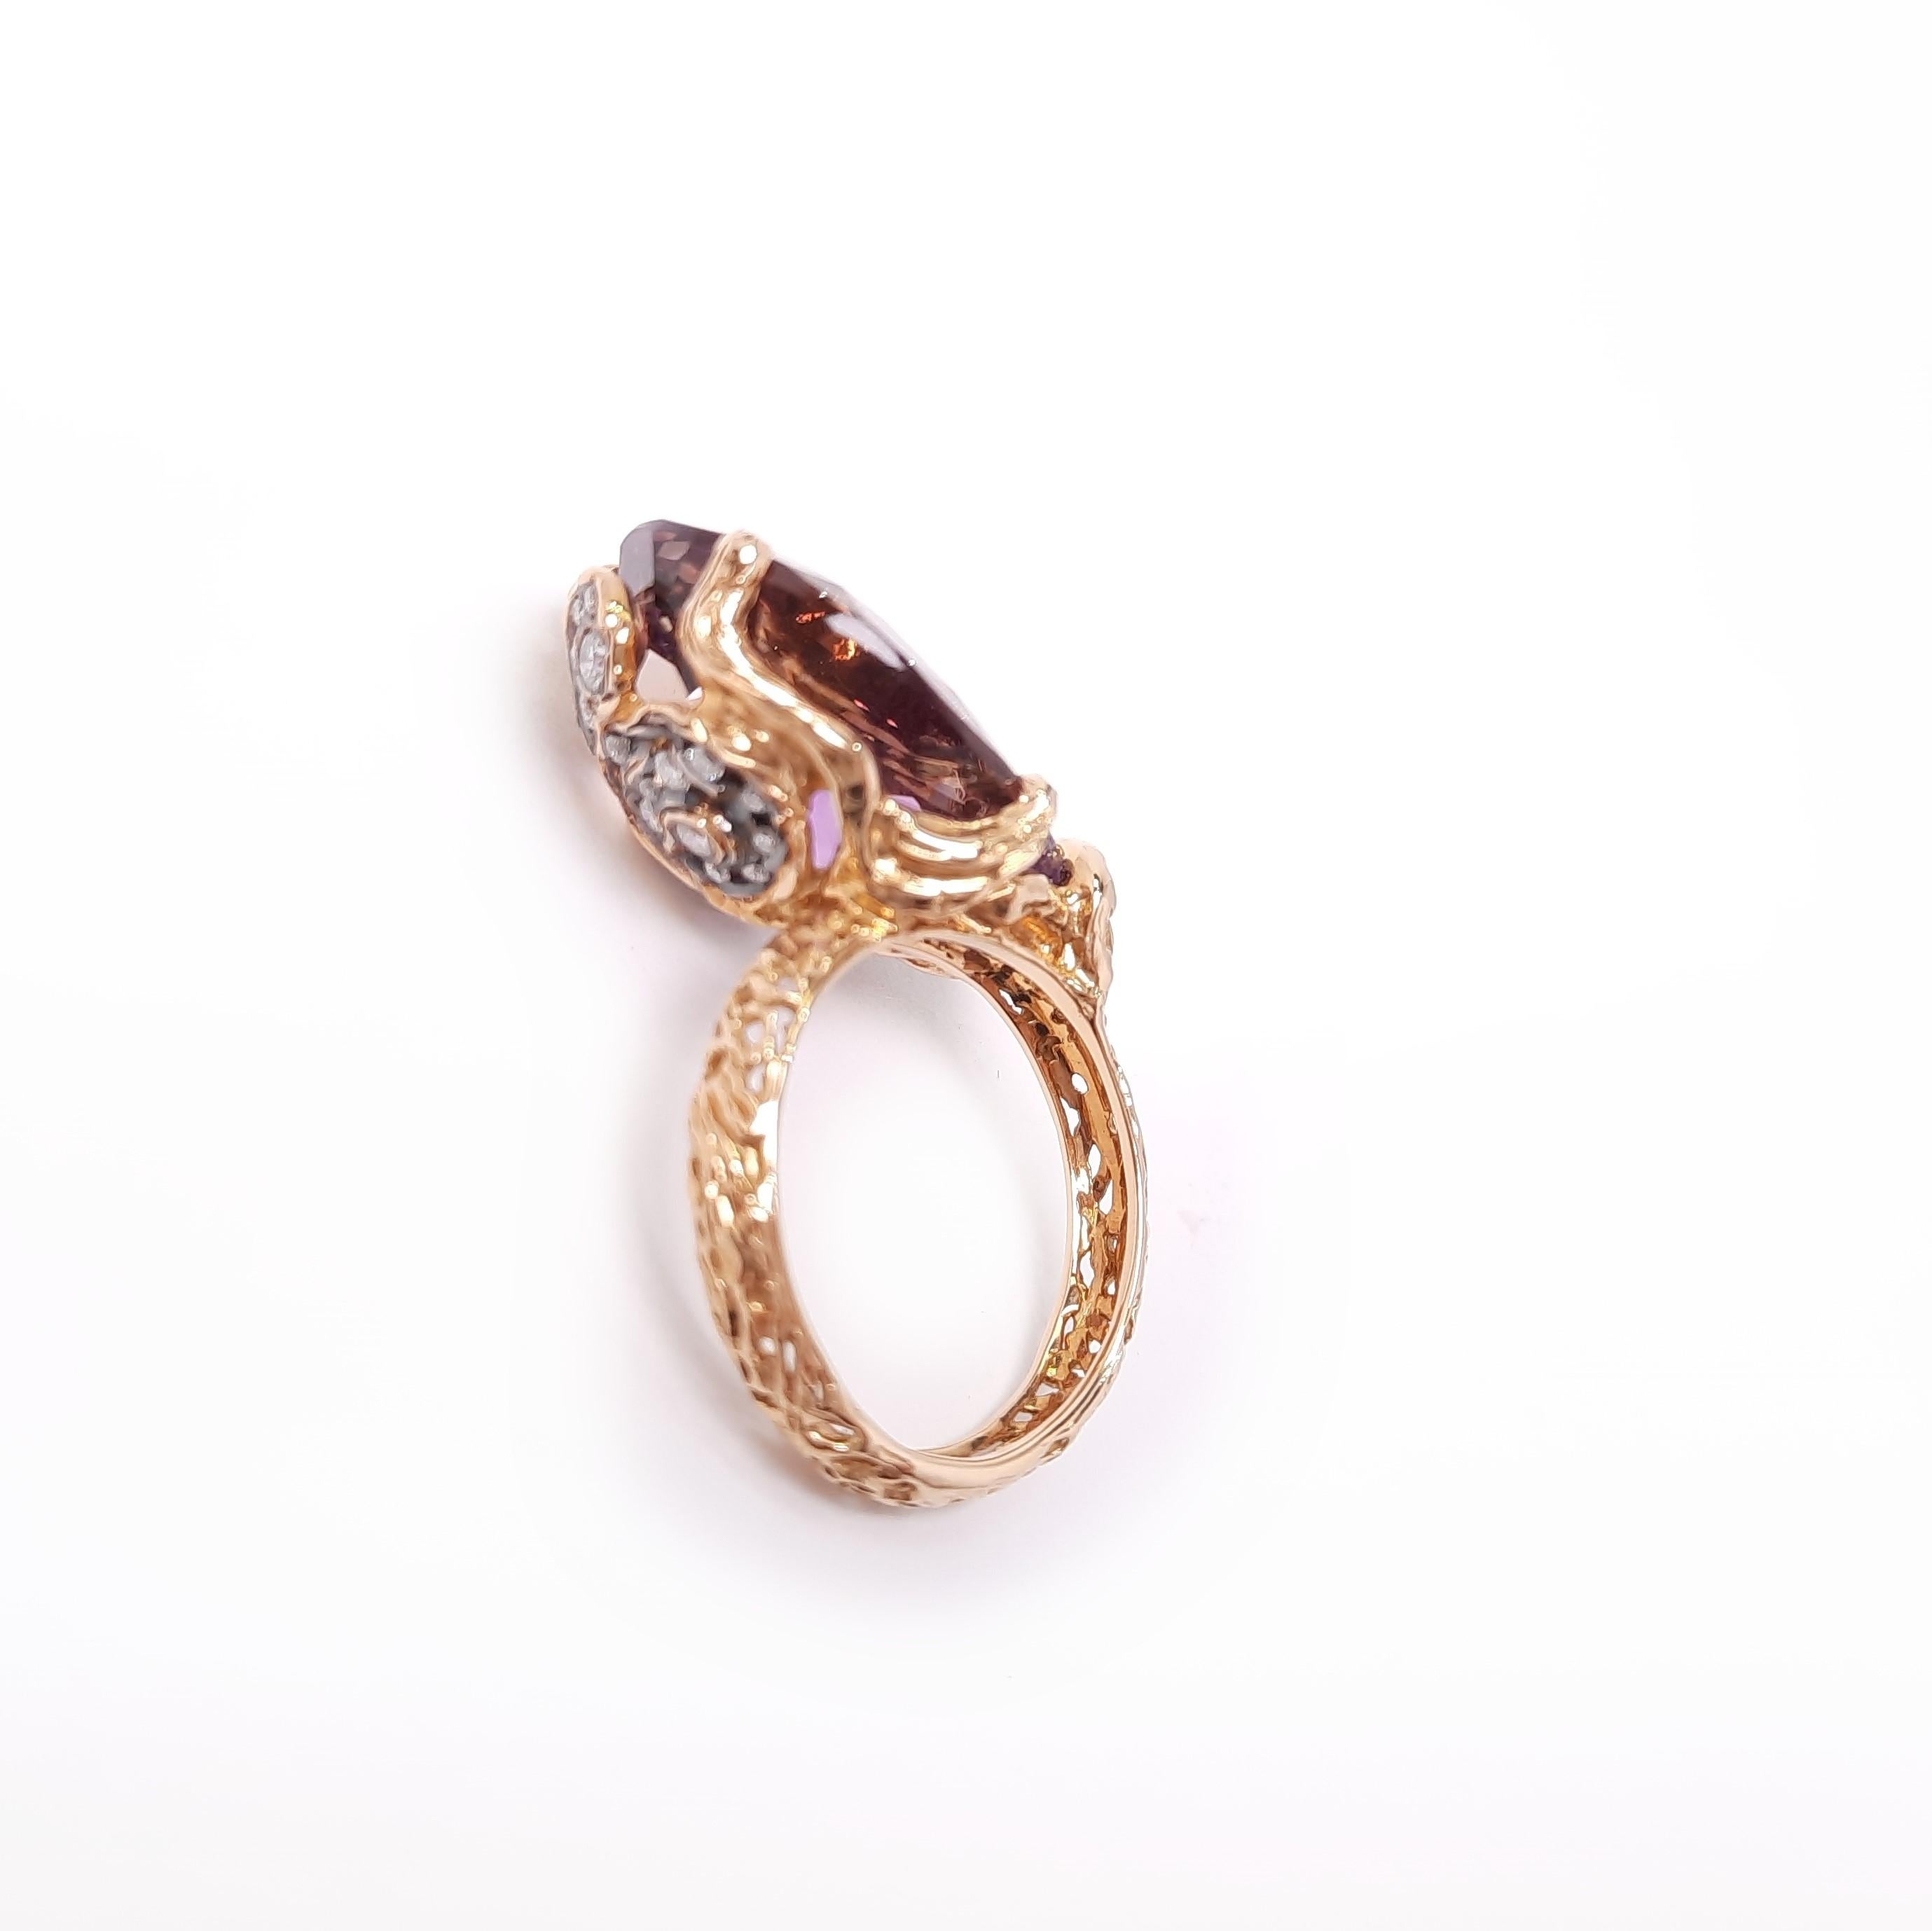 Inspired by impressionism and Starry Night by Vincent Van Gogh, MOISEIKIN® has created the swirling night sky image with intricate gold filigree, diamonds and fancy ametrine illustrating mysterious night sky. The fashionable ring is asymmetric,